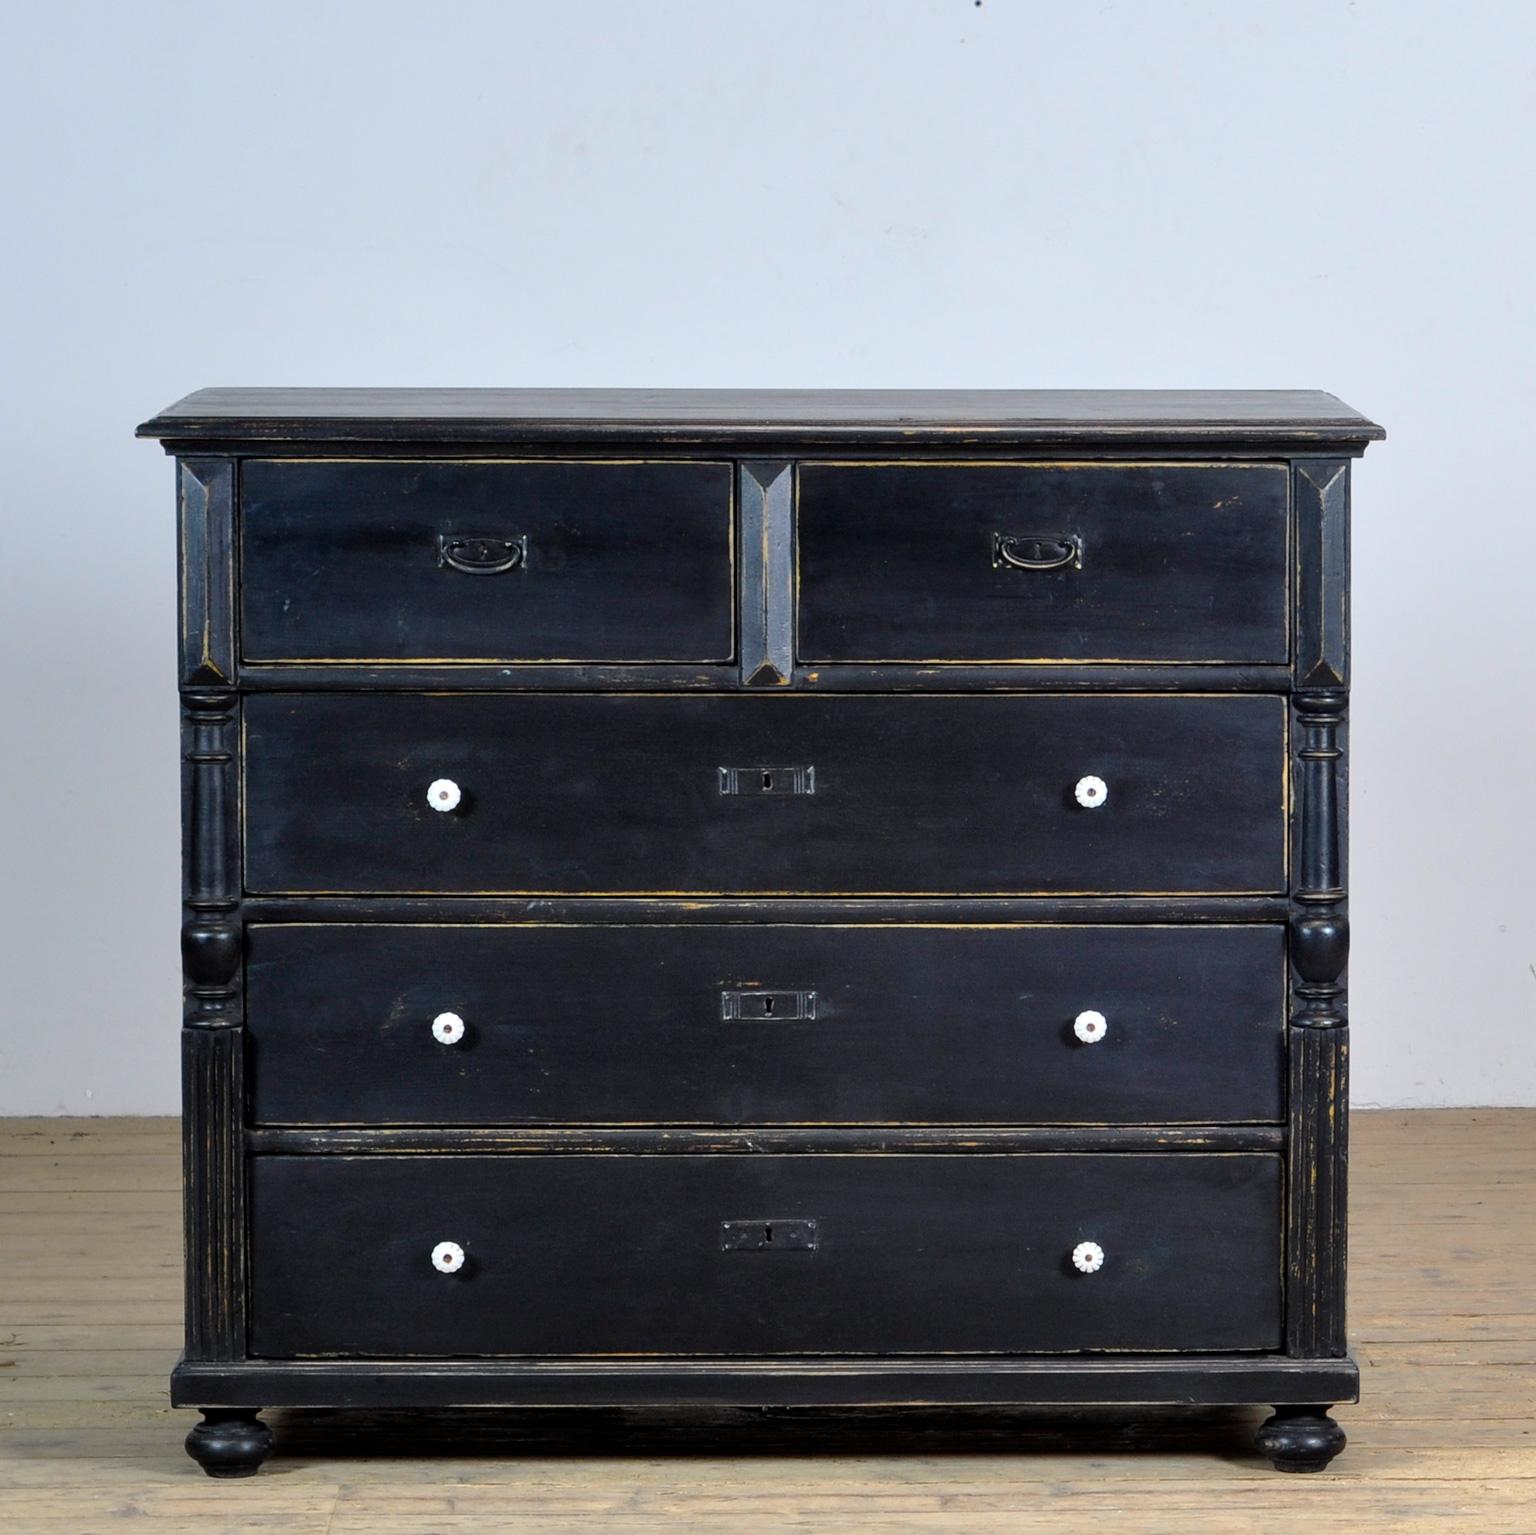 Chest of drawers made of pine, made in France circa 1920.
The cabinet has 5 drawers of which the top drawers are less wide. ll fittings and knobs are original. All joints of the drawers have been made with dovetail connections. The lower three